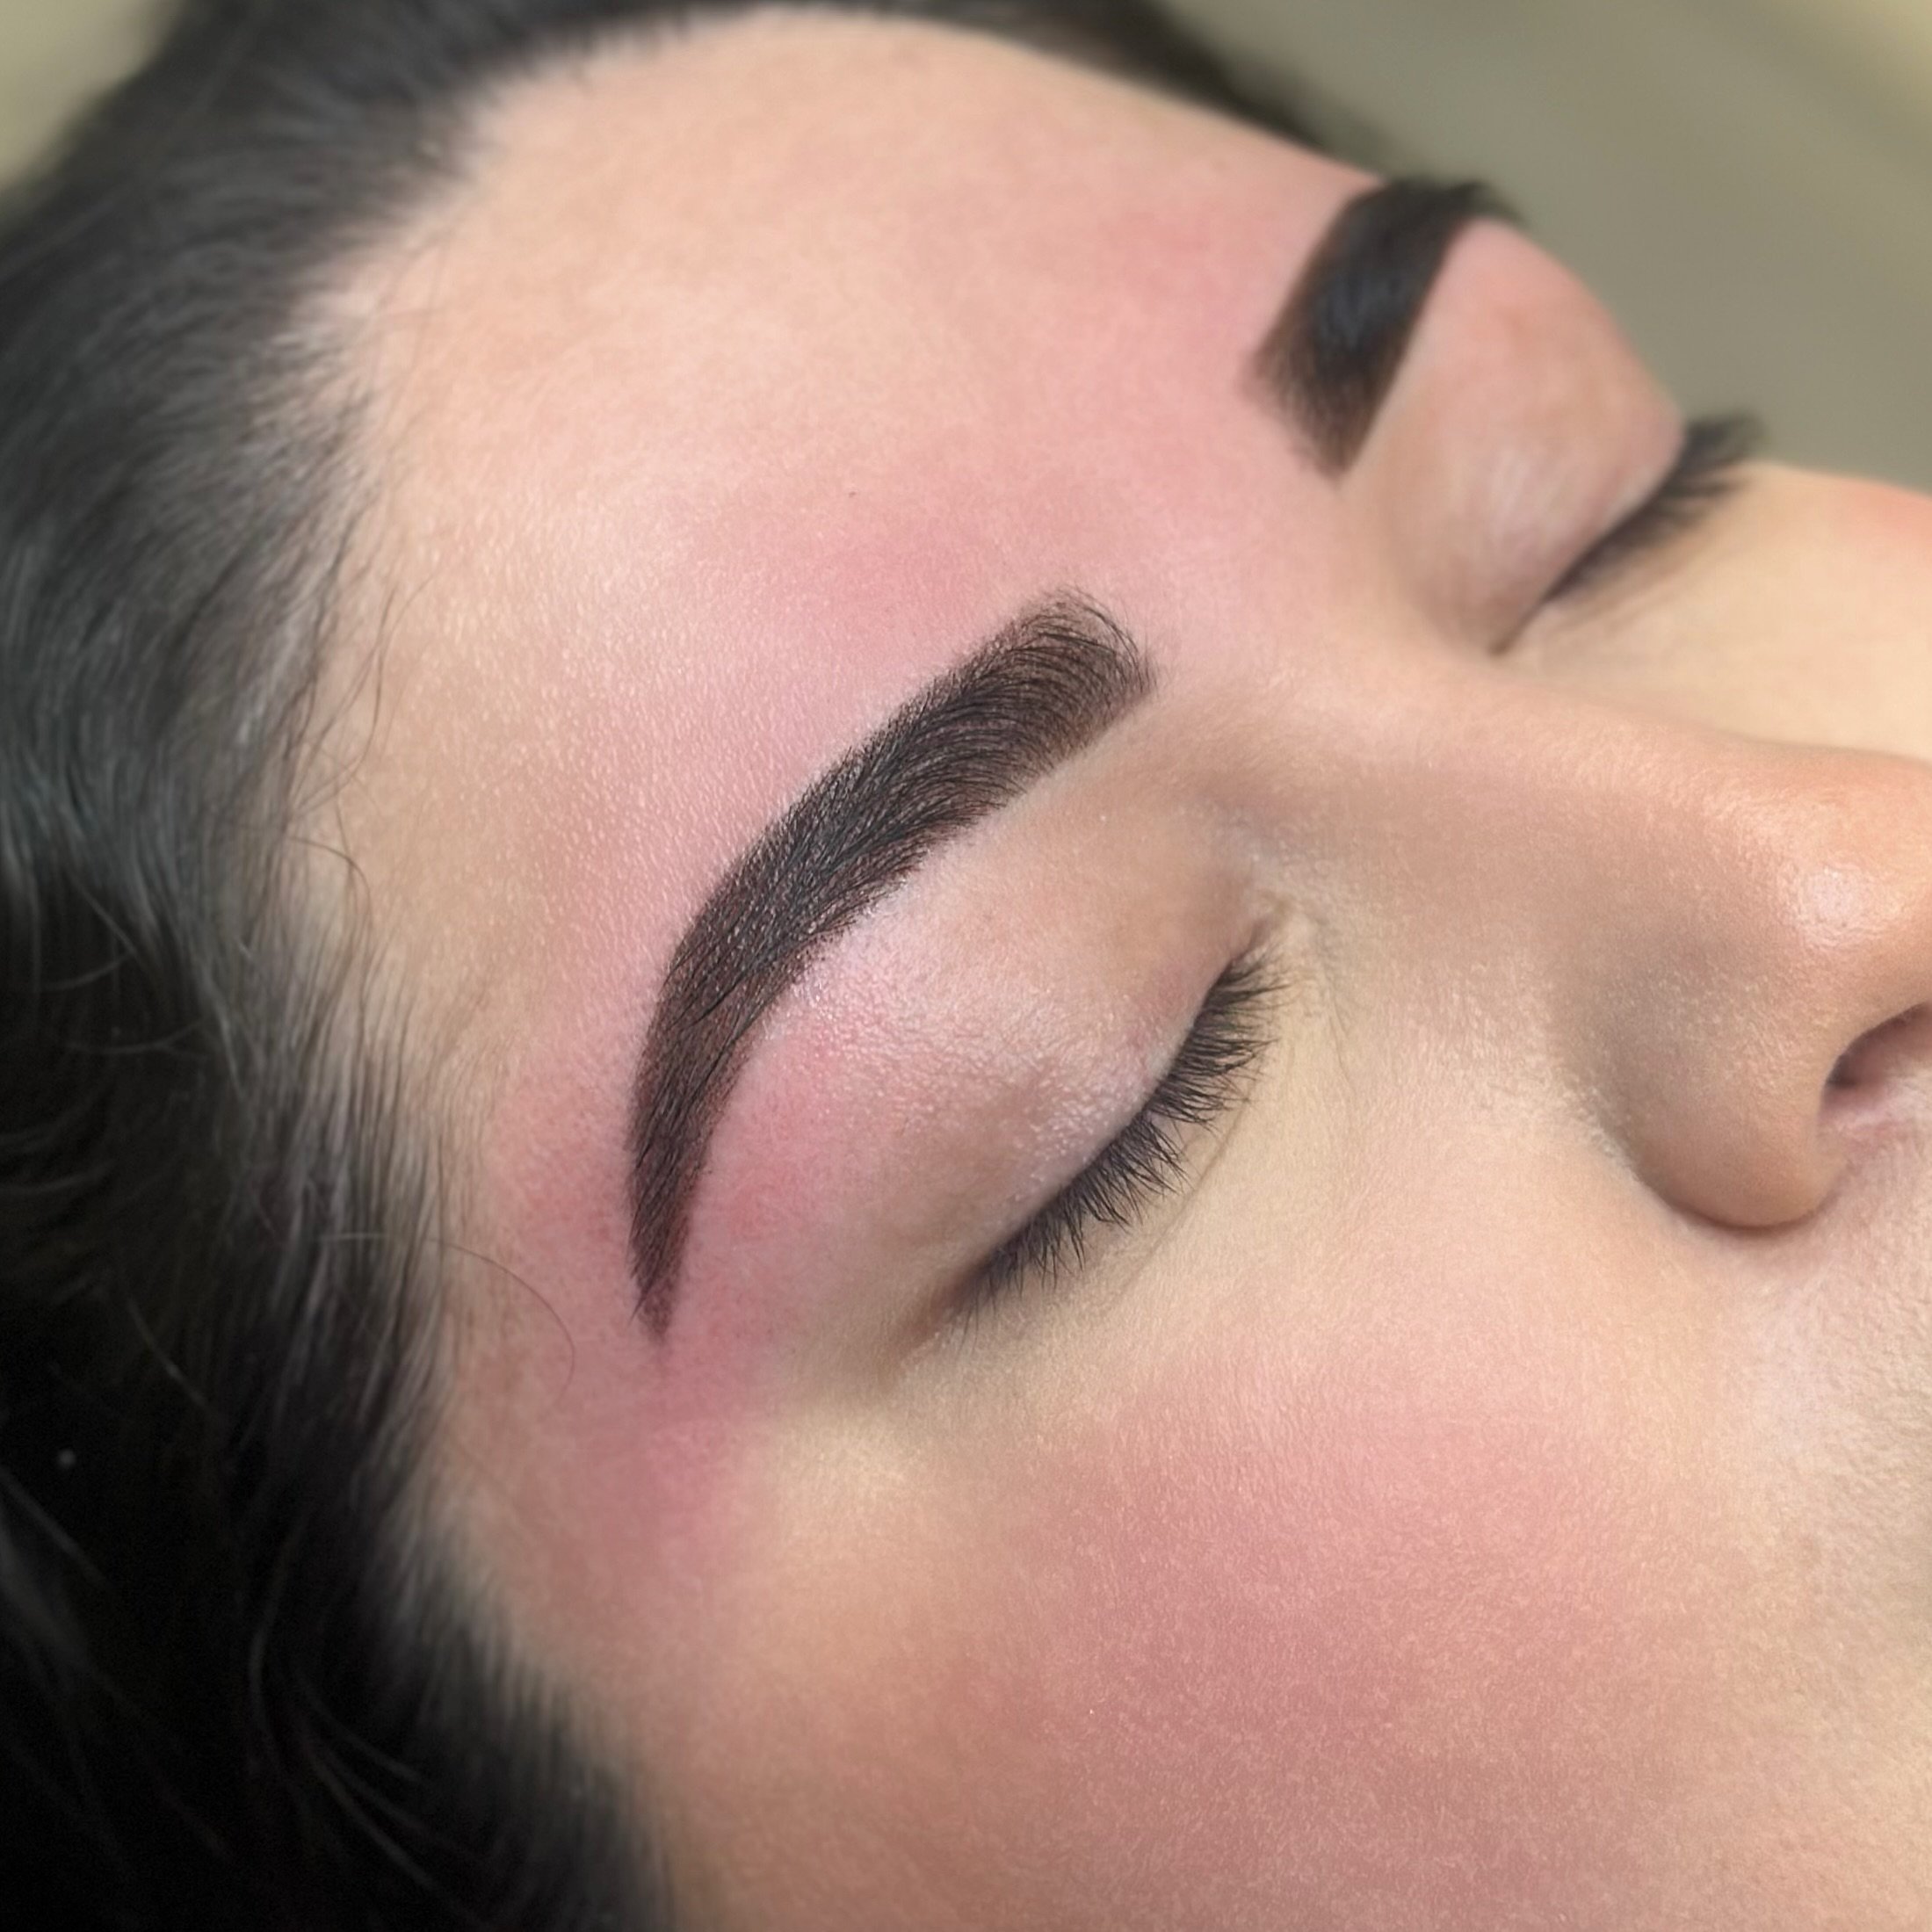 Beautiful hybrid tint and wax by our artist @rayy.of.beautyy 👏🏽 using our @browdaddy hybrid tints 🫶🏼 #hybridtint #browdaddy #browdaddyhybridtint #browdaddytint #wax #shaping #brows #browshaping #browwaxing #browtinting